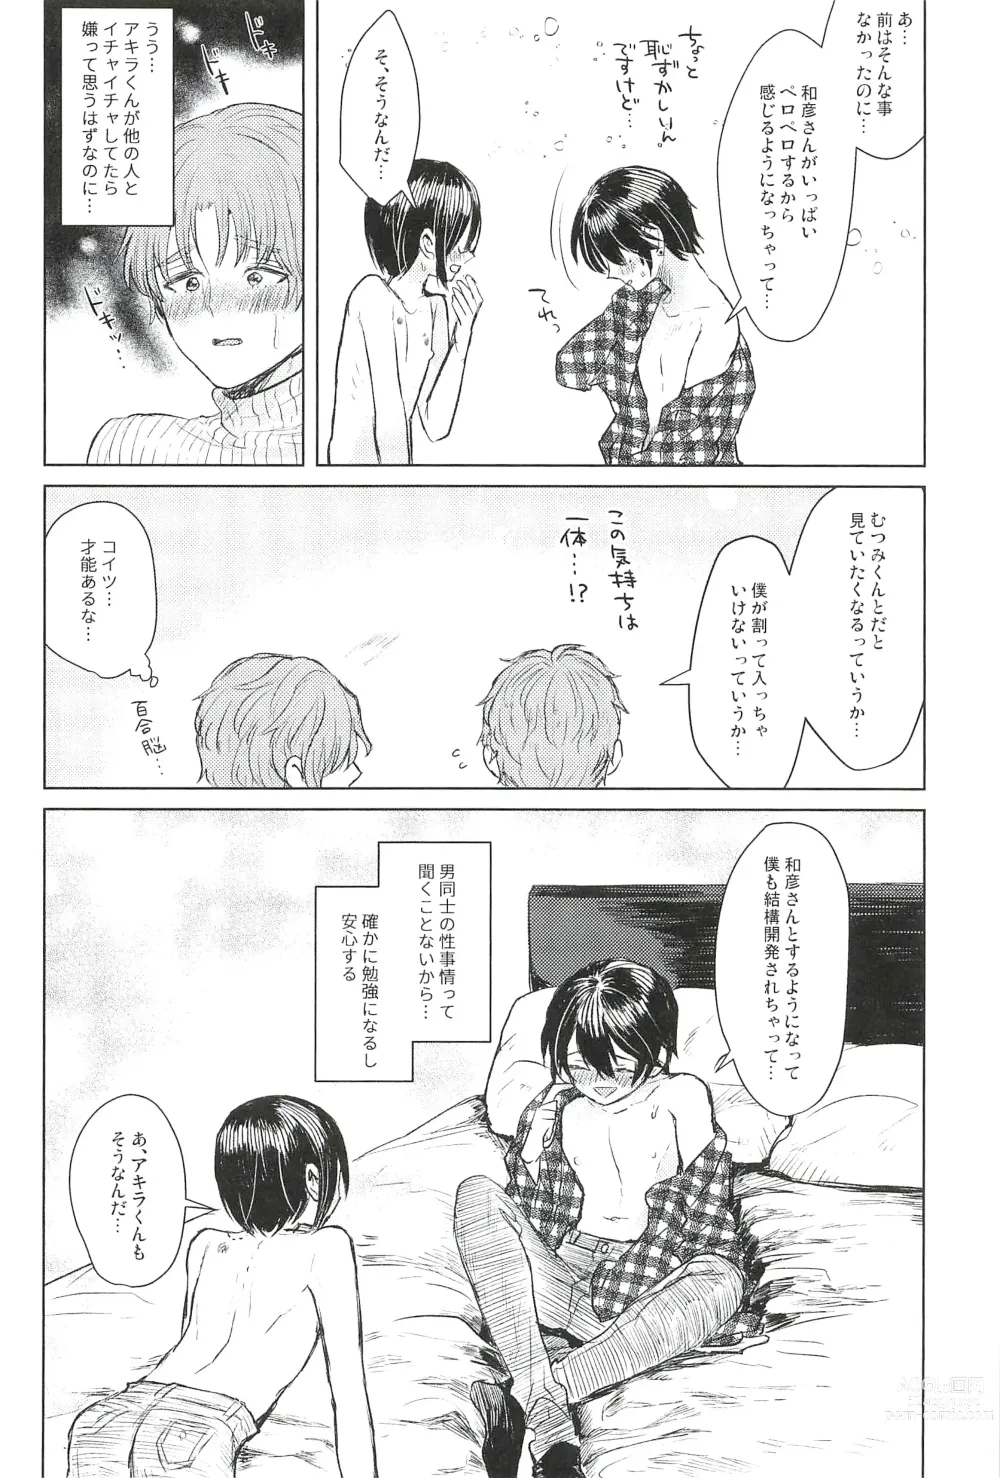 Page 12 of doujinshi ONE MORE 4P